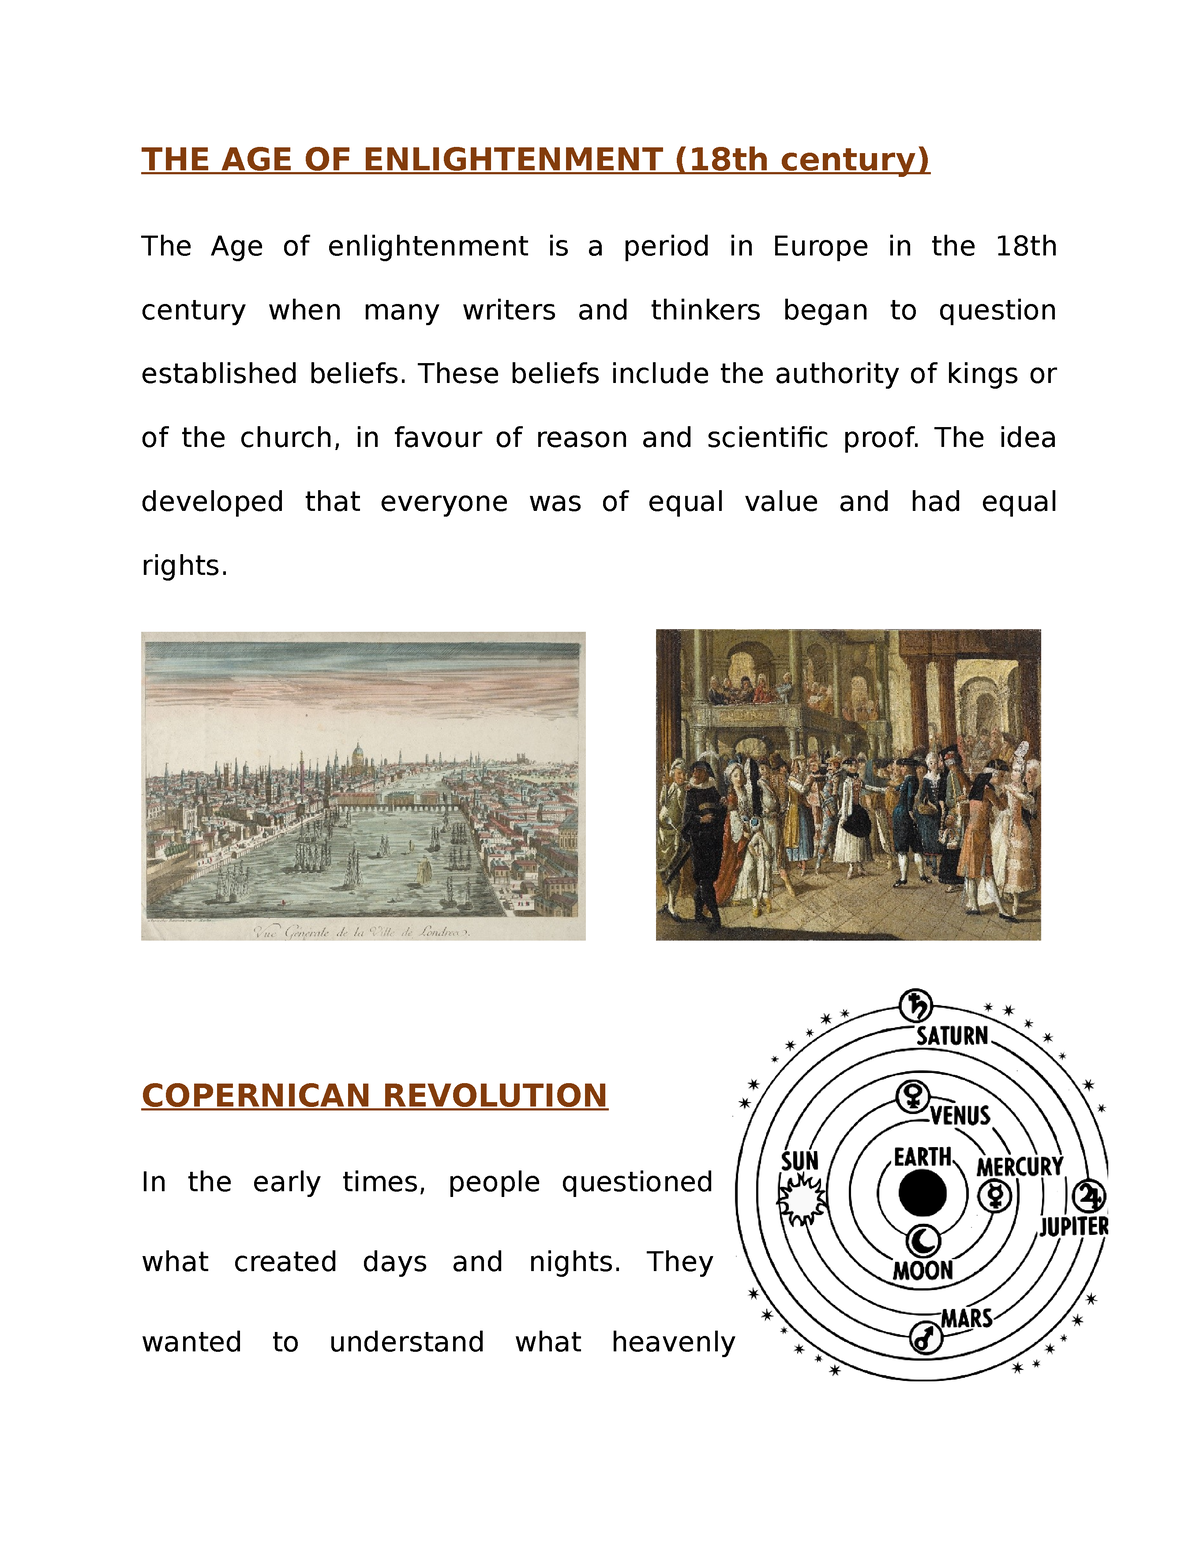 age of enlightenment timeline